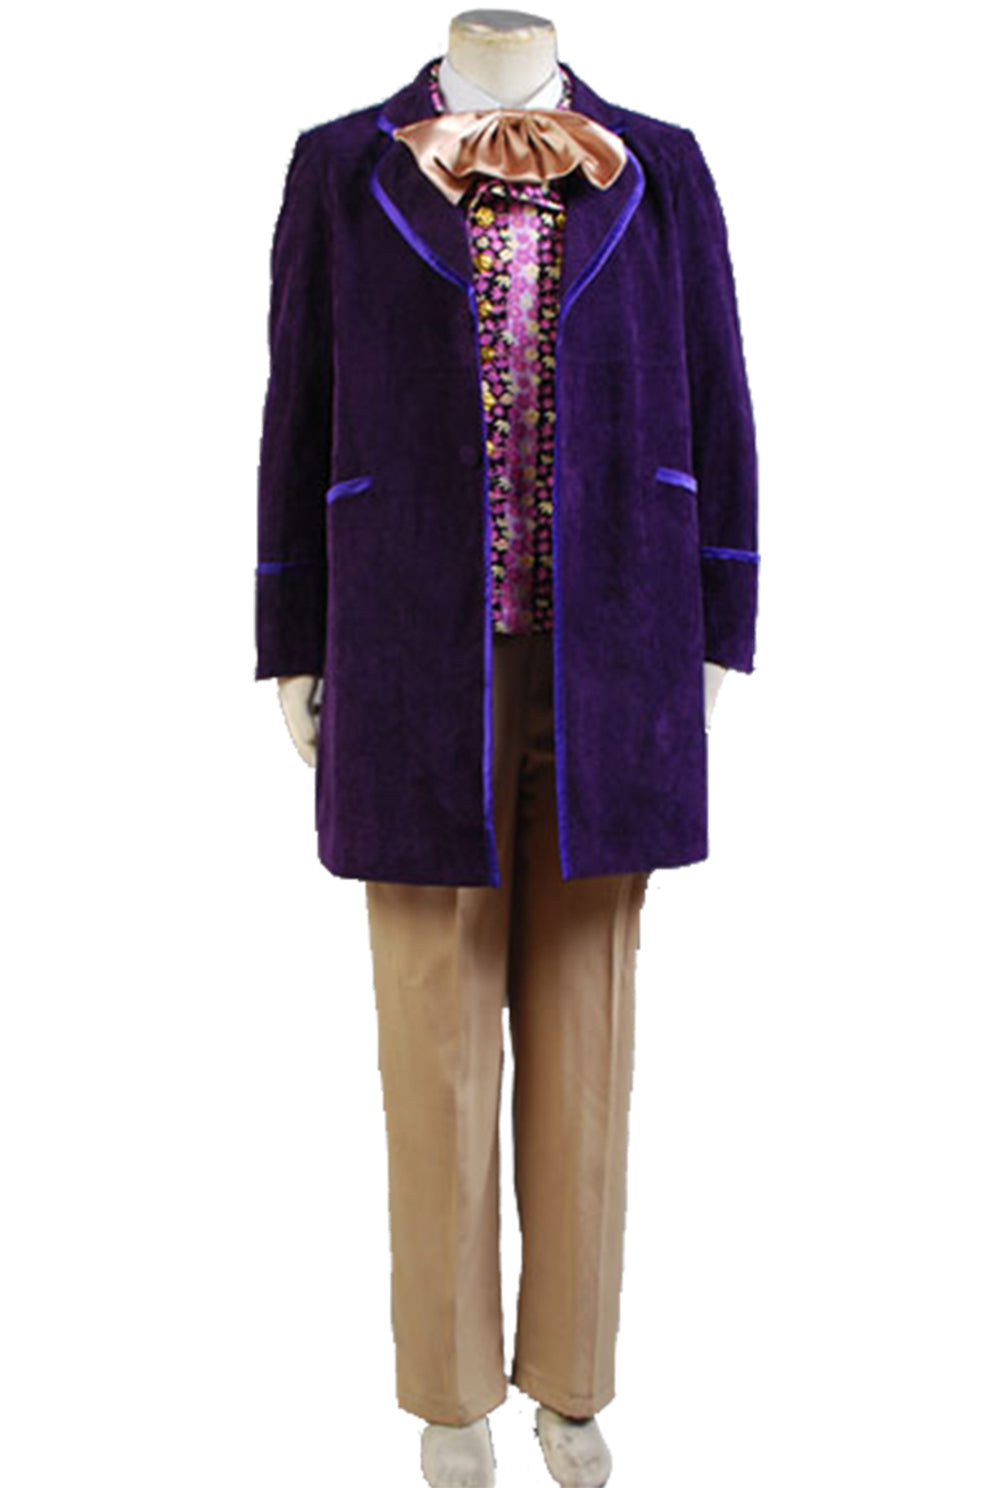 Willy Wonka and the Chocolate Factory 1971 Costume - Coat,Vest,Bow Tie,Pants